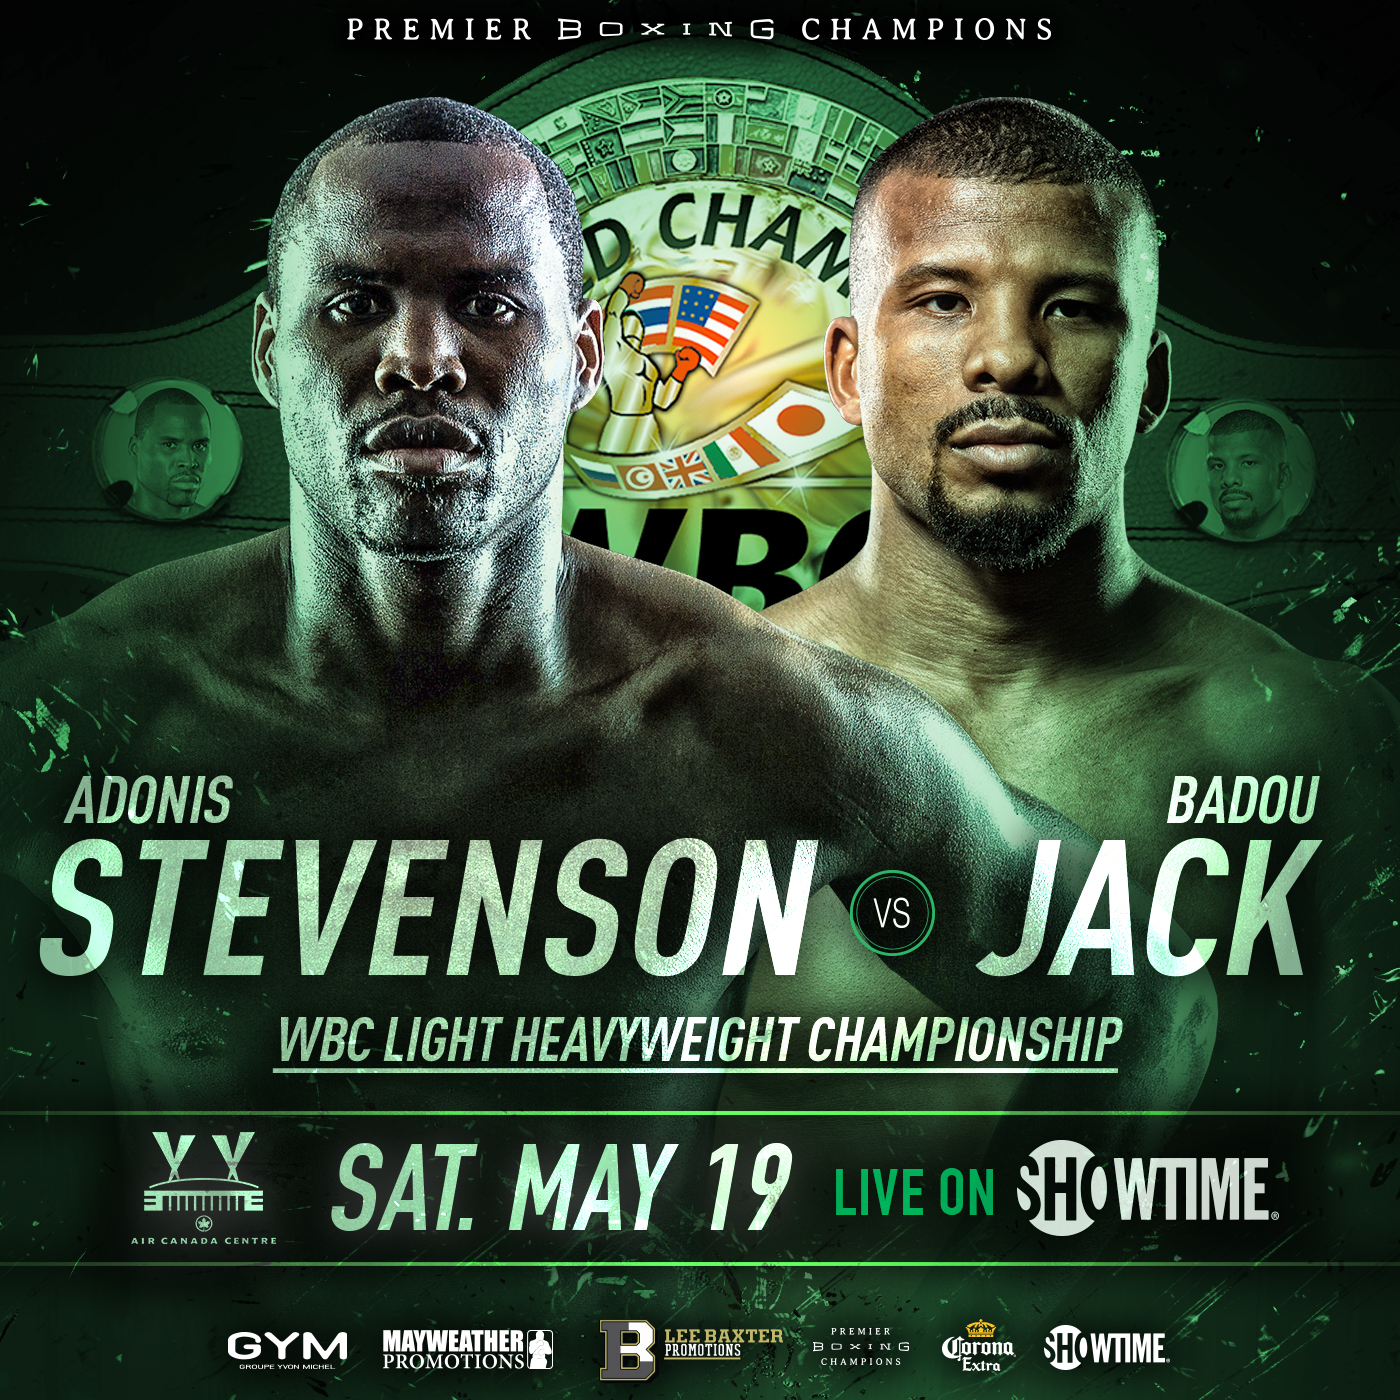 Adonis Stevenson vs. Badou Jack May 19 Live from Toronto’s Aire Canada Centre